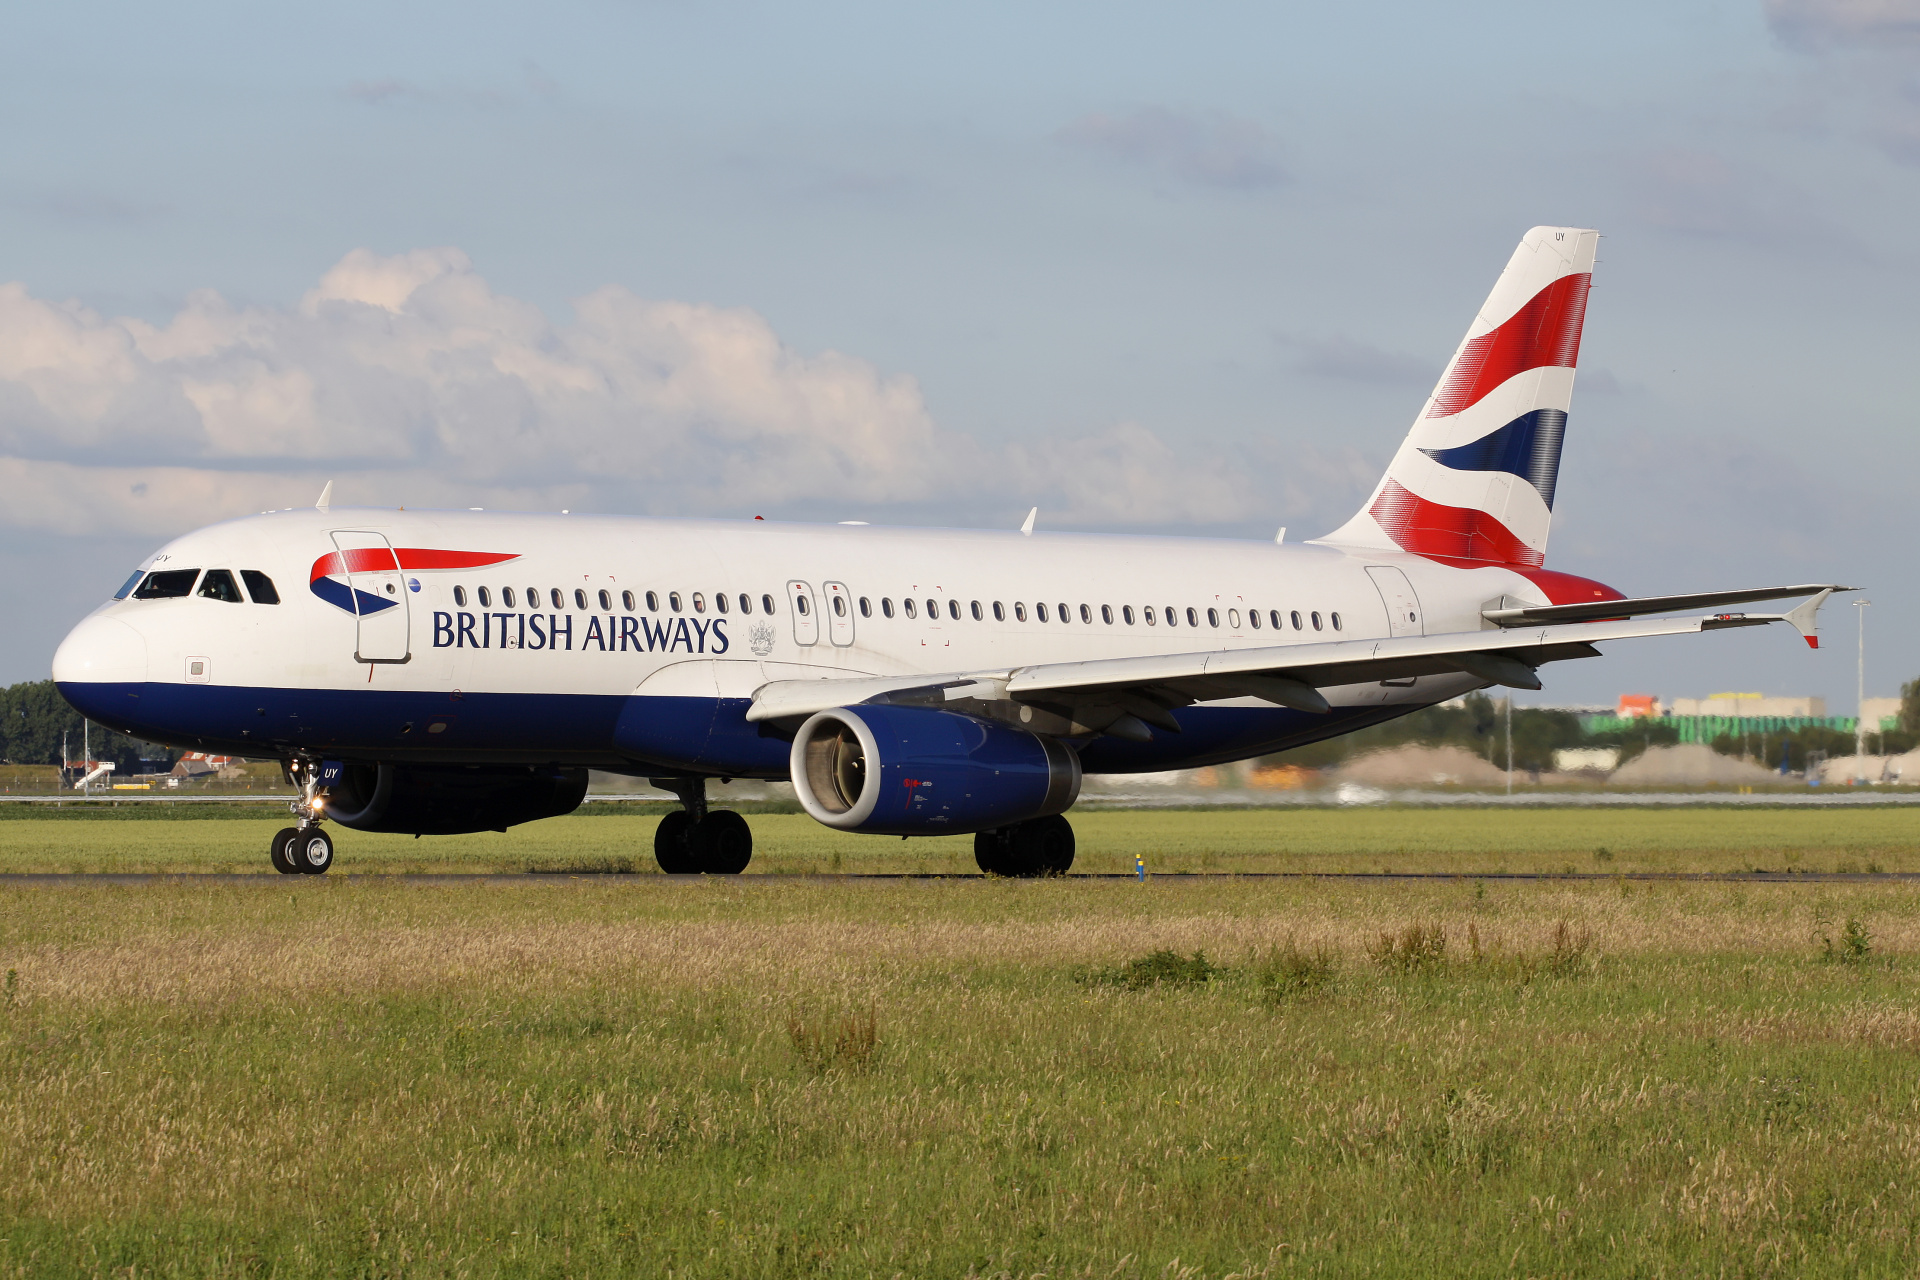 G-EUUY, British Airways (Aircraft » Schiphol Spotting » Airbus A320-200)